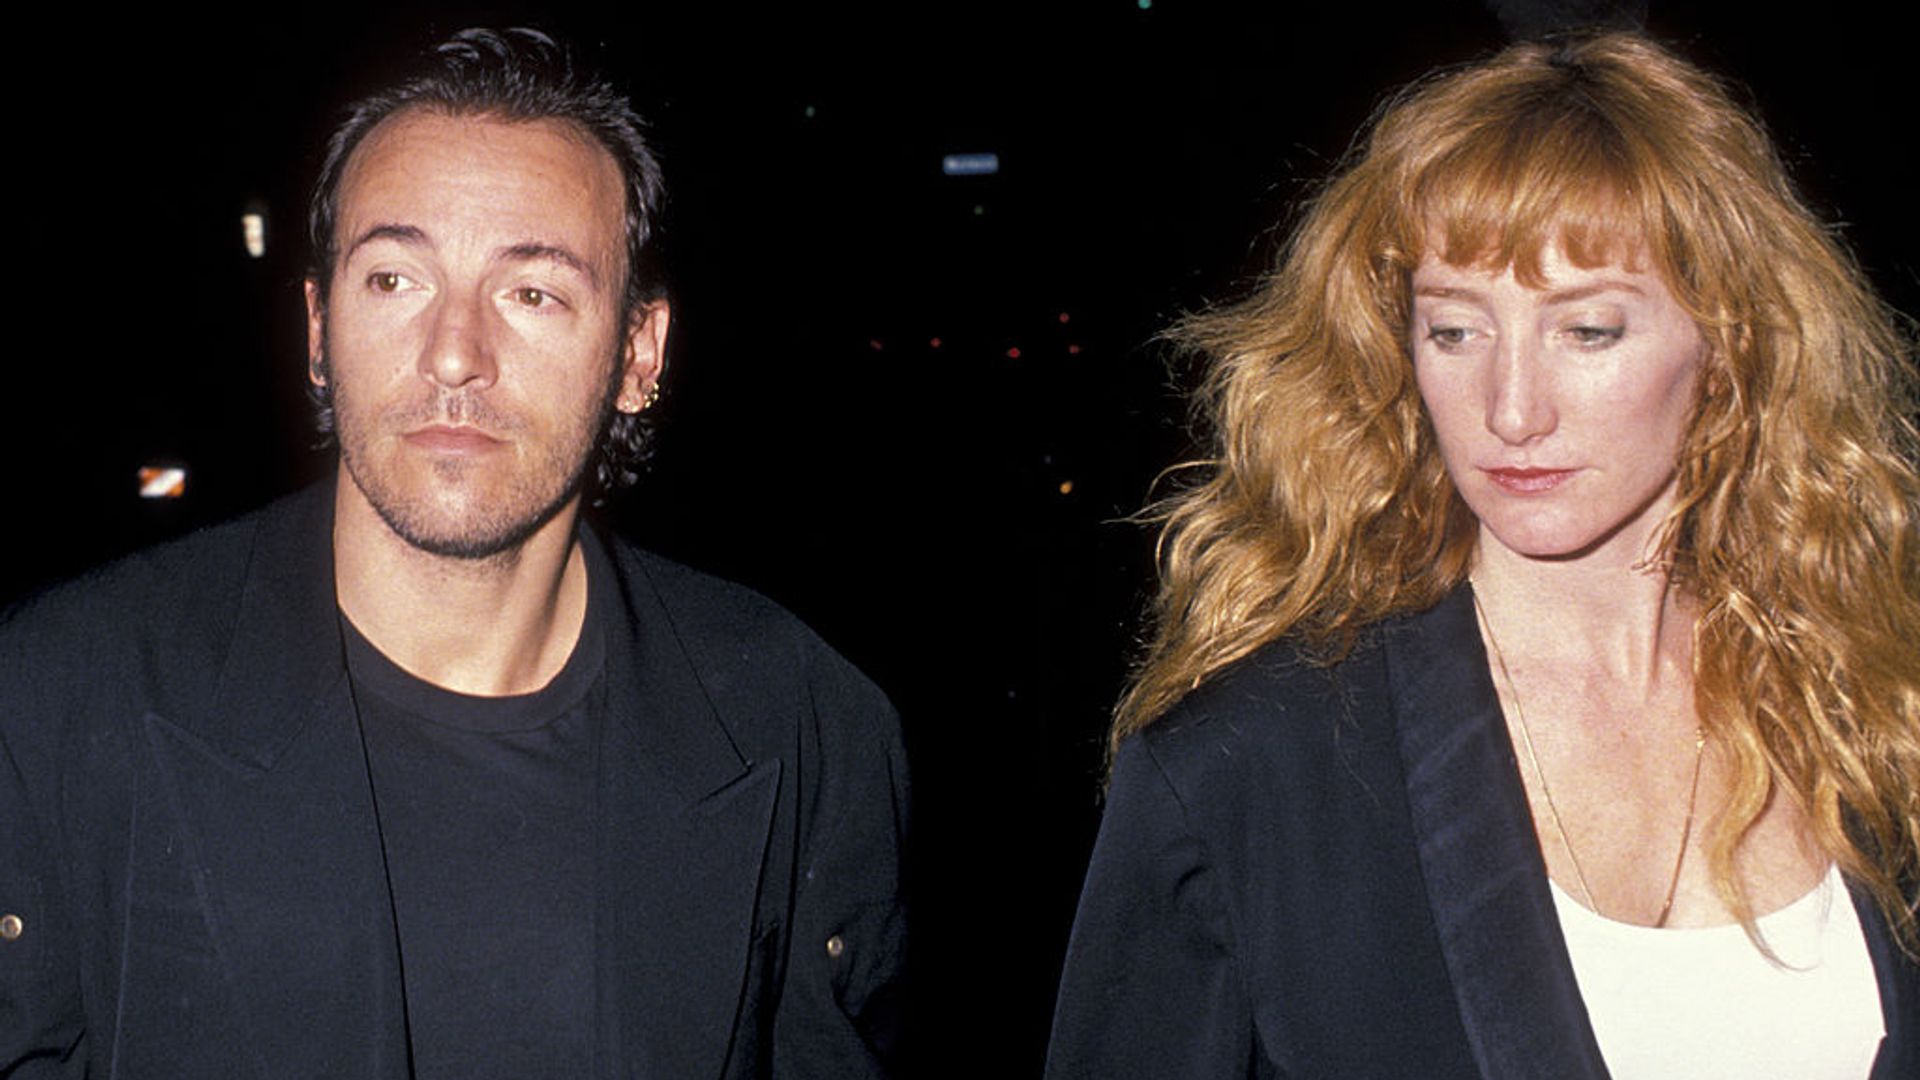 Bruce Springsteen and Patti Scialfa attend the performance of "Hurlyburly" on December 1, 1988